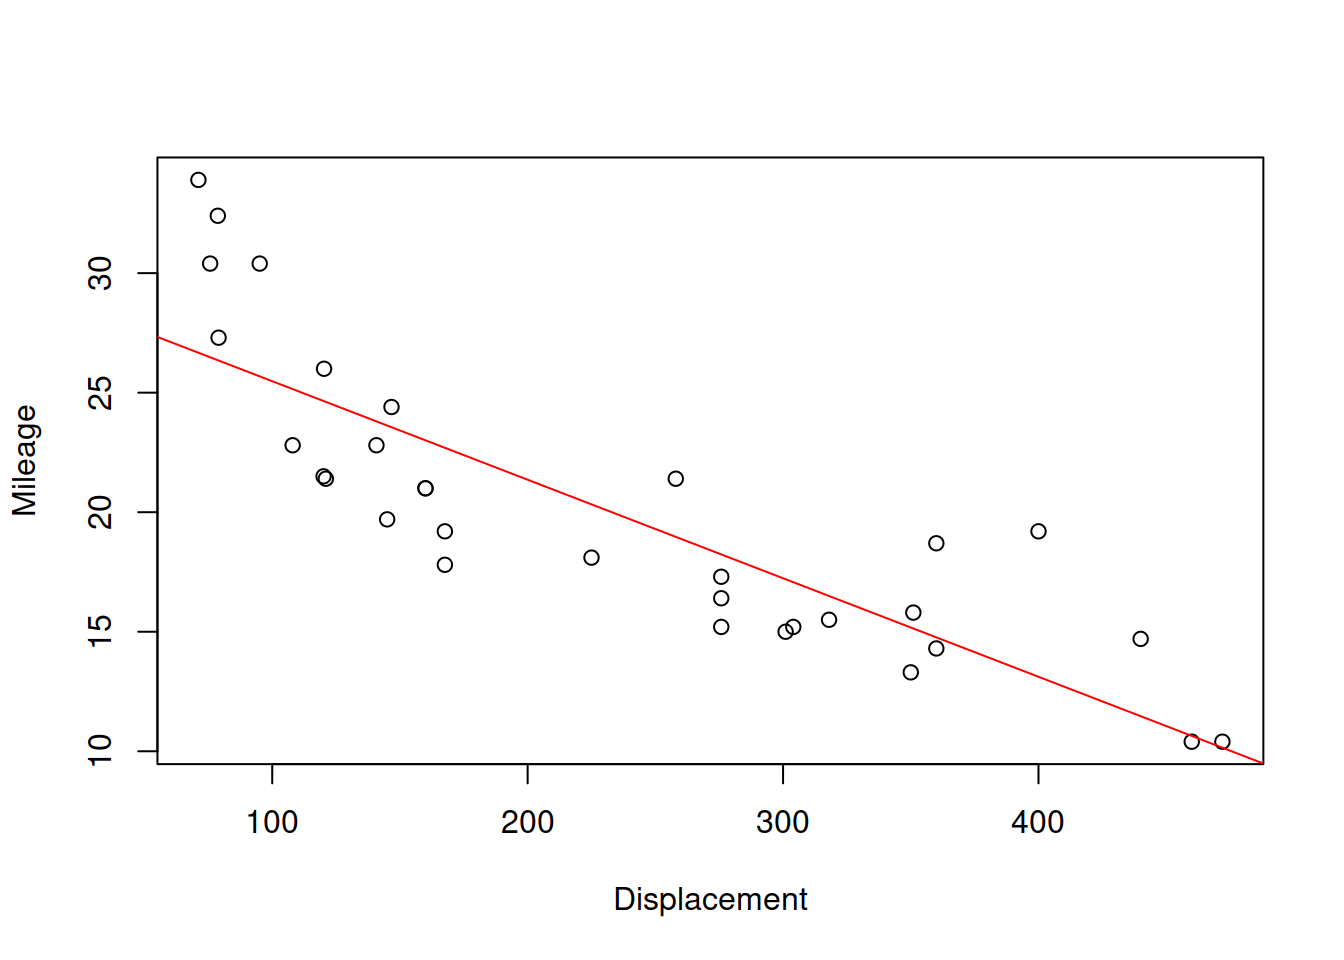 Scatterplot for dispalcement vs mileage variables in mtcars dataset